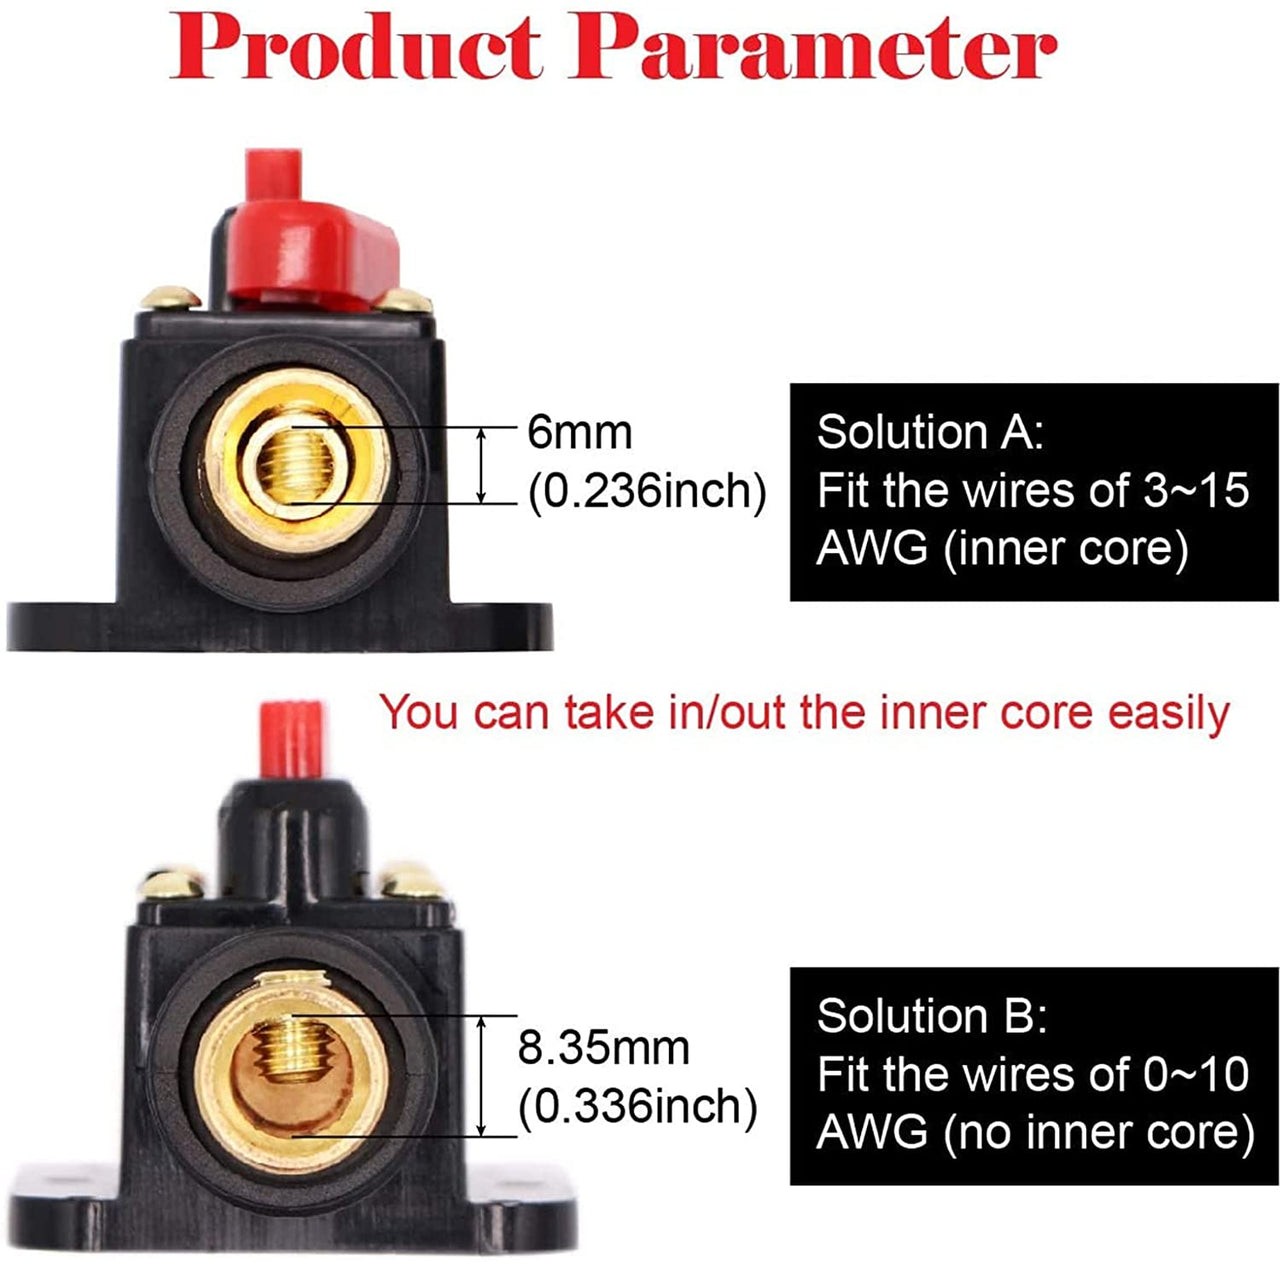 Absolute ICB60 4/8 AWG 60 Amp in-line Circuit Breaker with Manual Reset with Manual Reset Car Auto Marine Boat Stereo